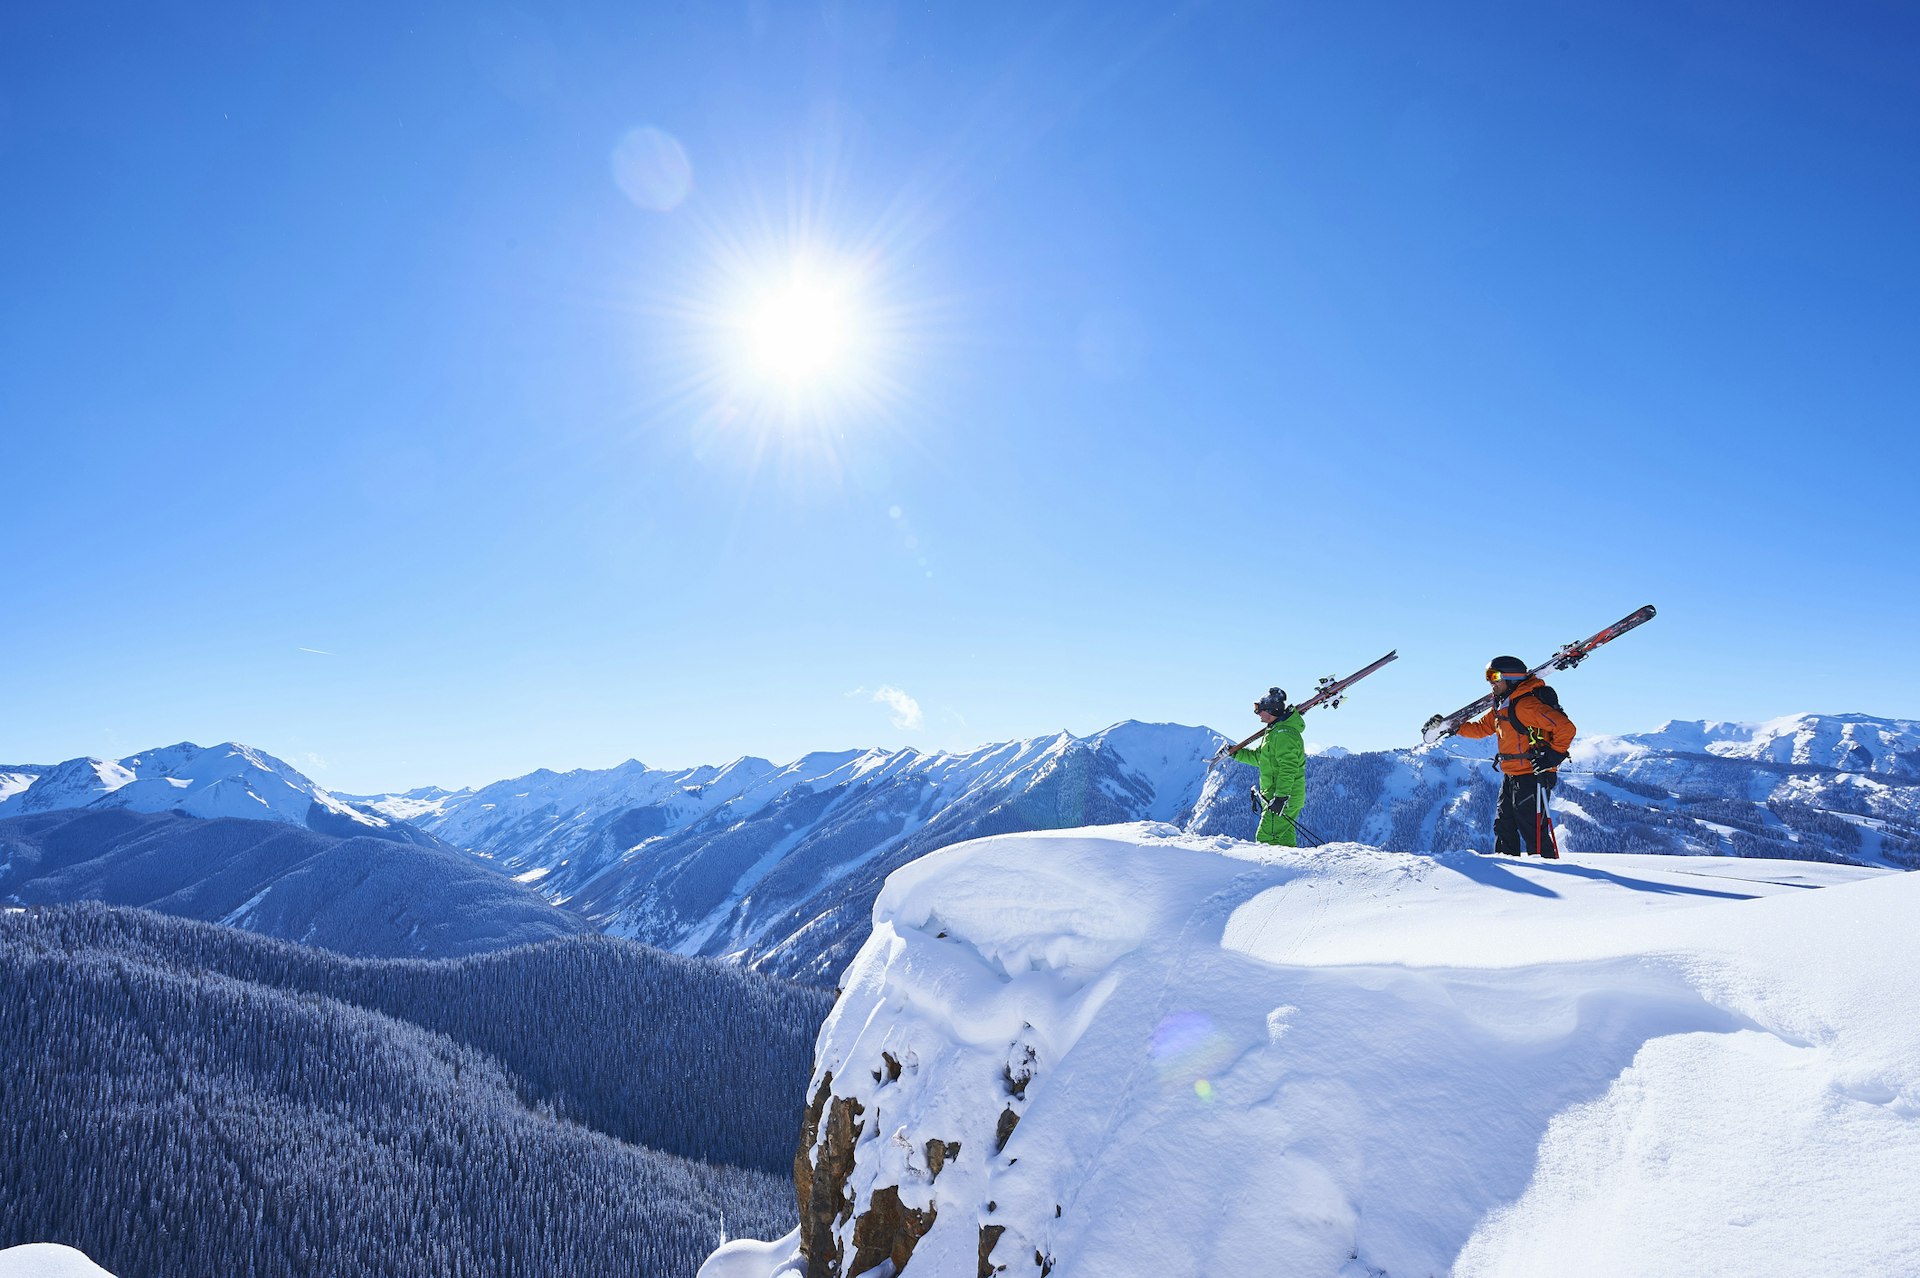 Two skiers take in the snowy views of Aspen, Colorado 